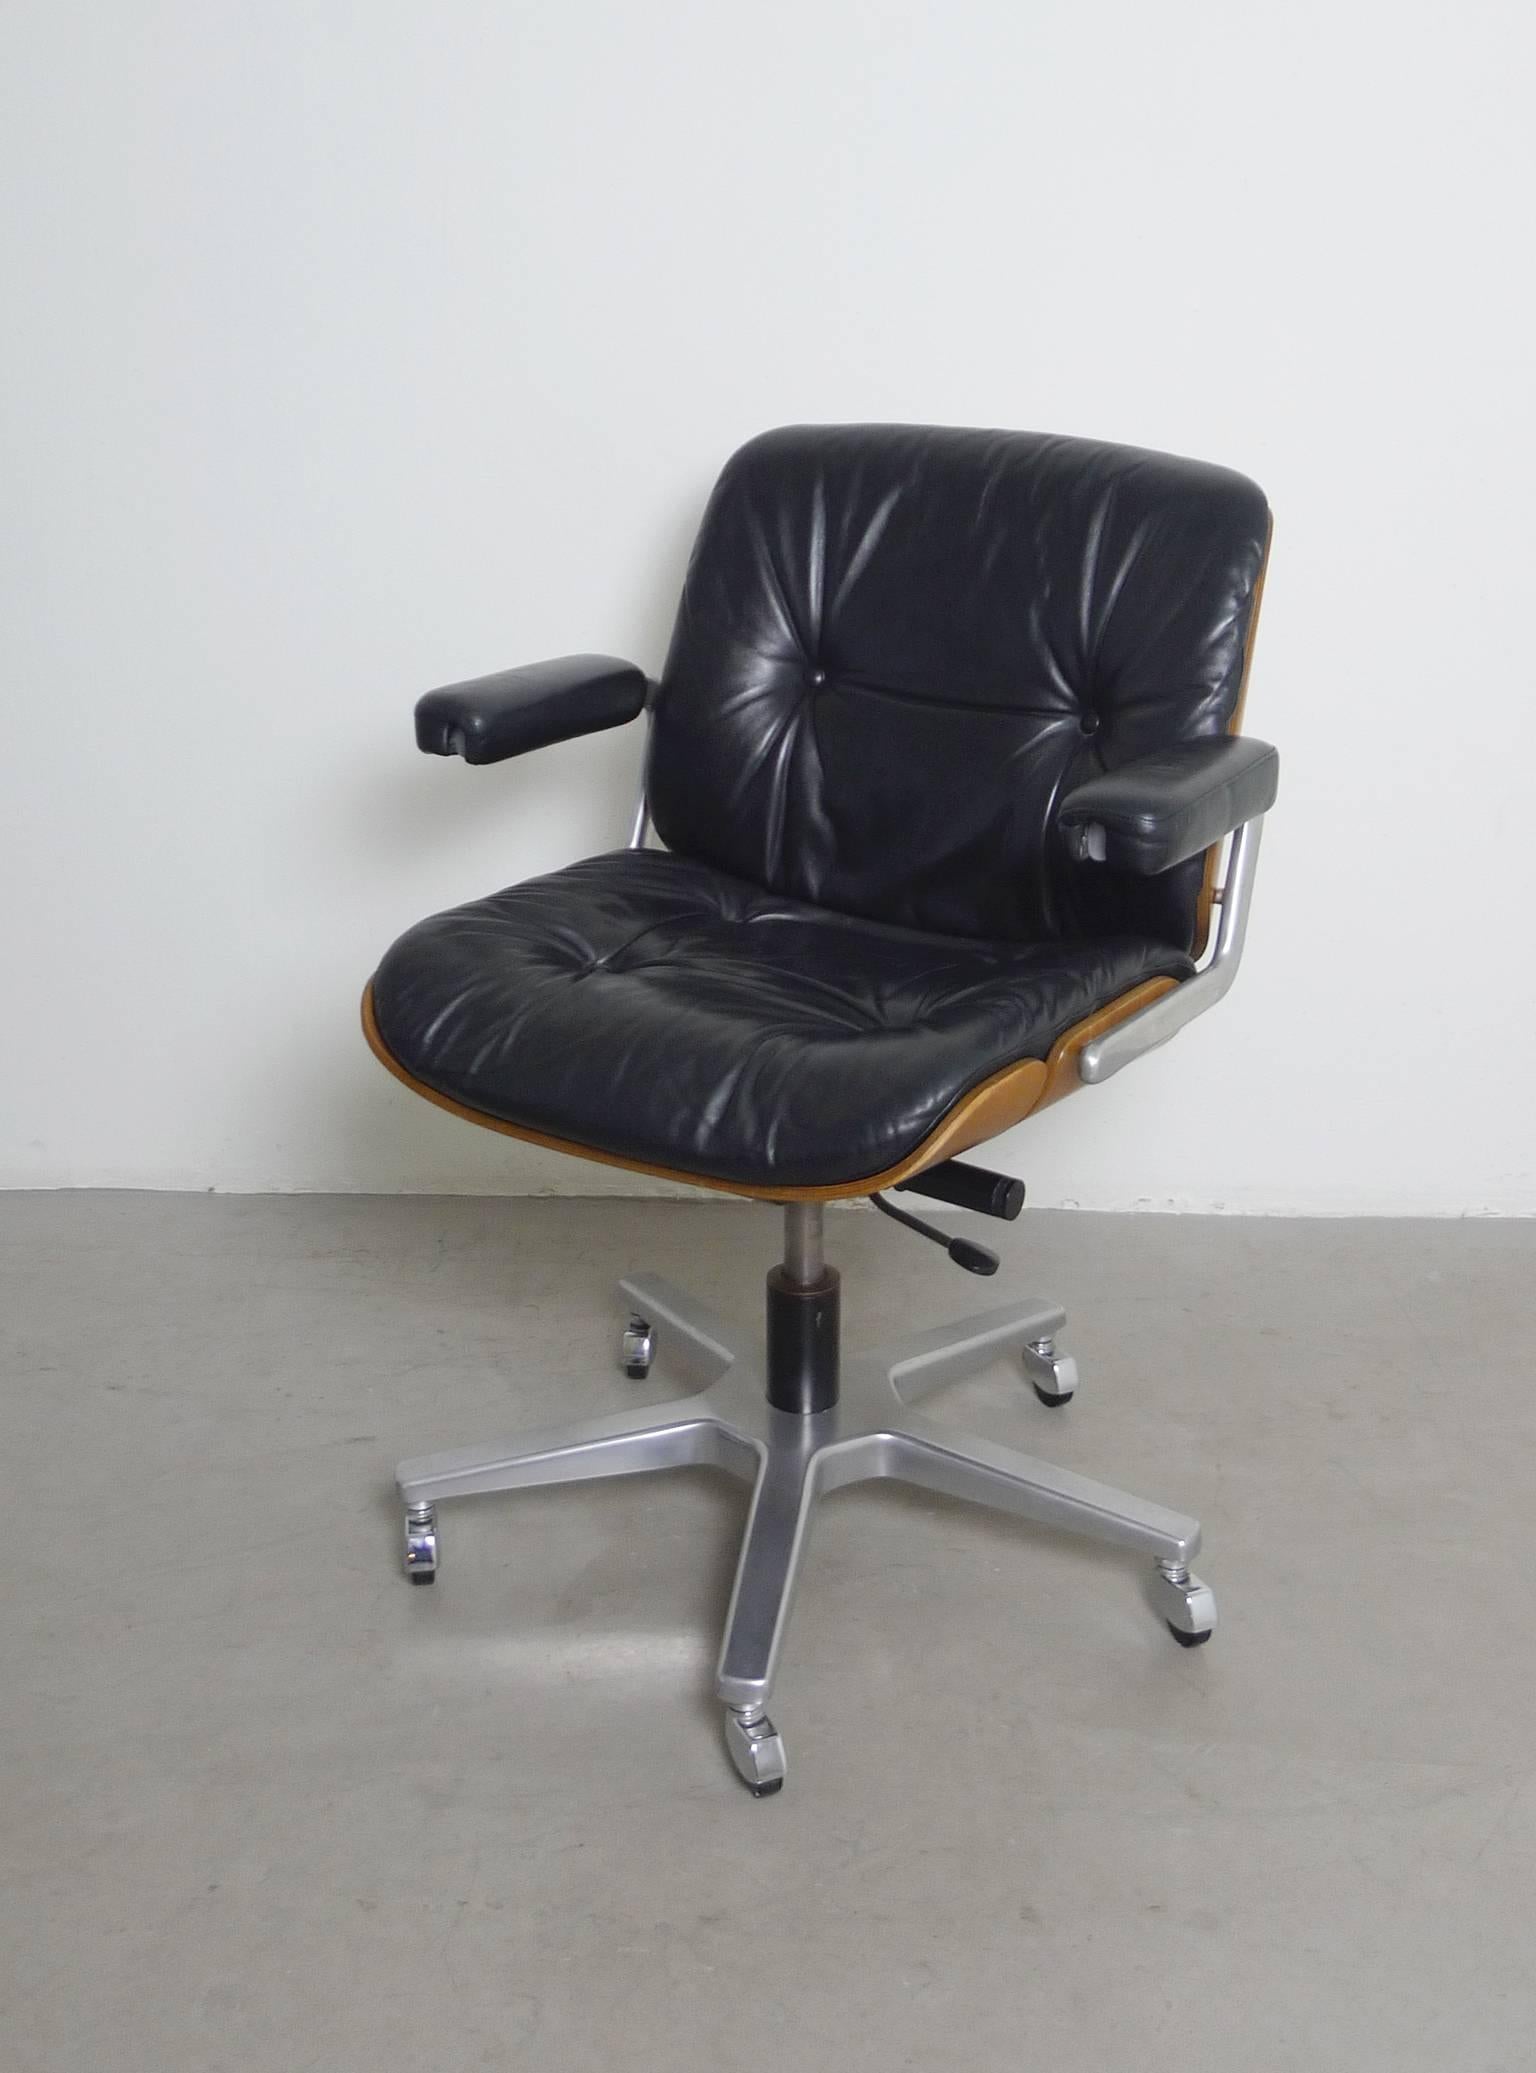 Elaborate and very comfortable office chair with laminated wood seat shell and leather cushions from the Swiss manufacturer Stoll Giroflex AG. The chair is wheelable, revolving and adjustable in height and grade. The pressure spring is fully